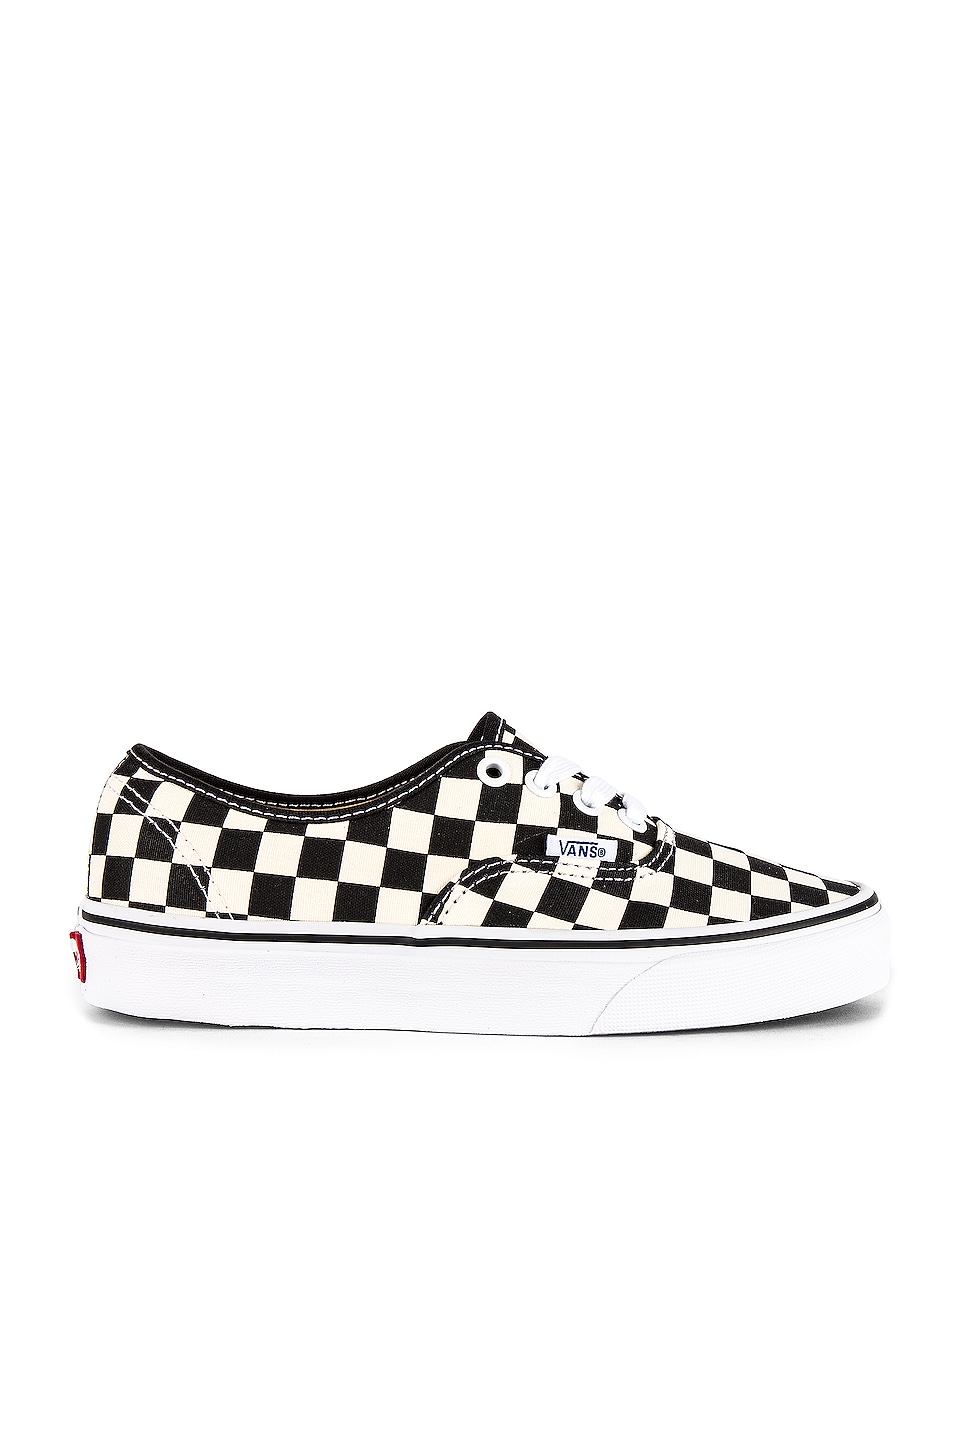 vans authentic black and white checkered